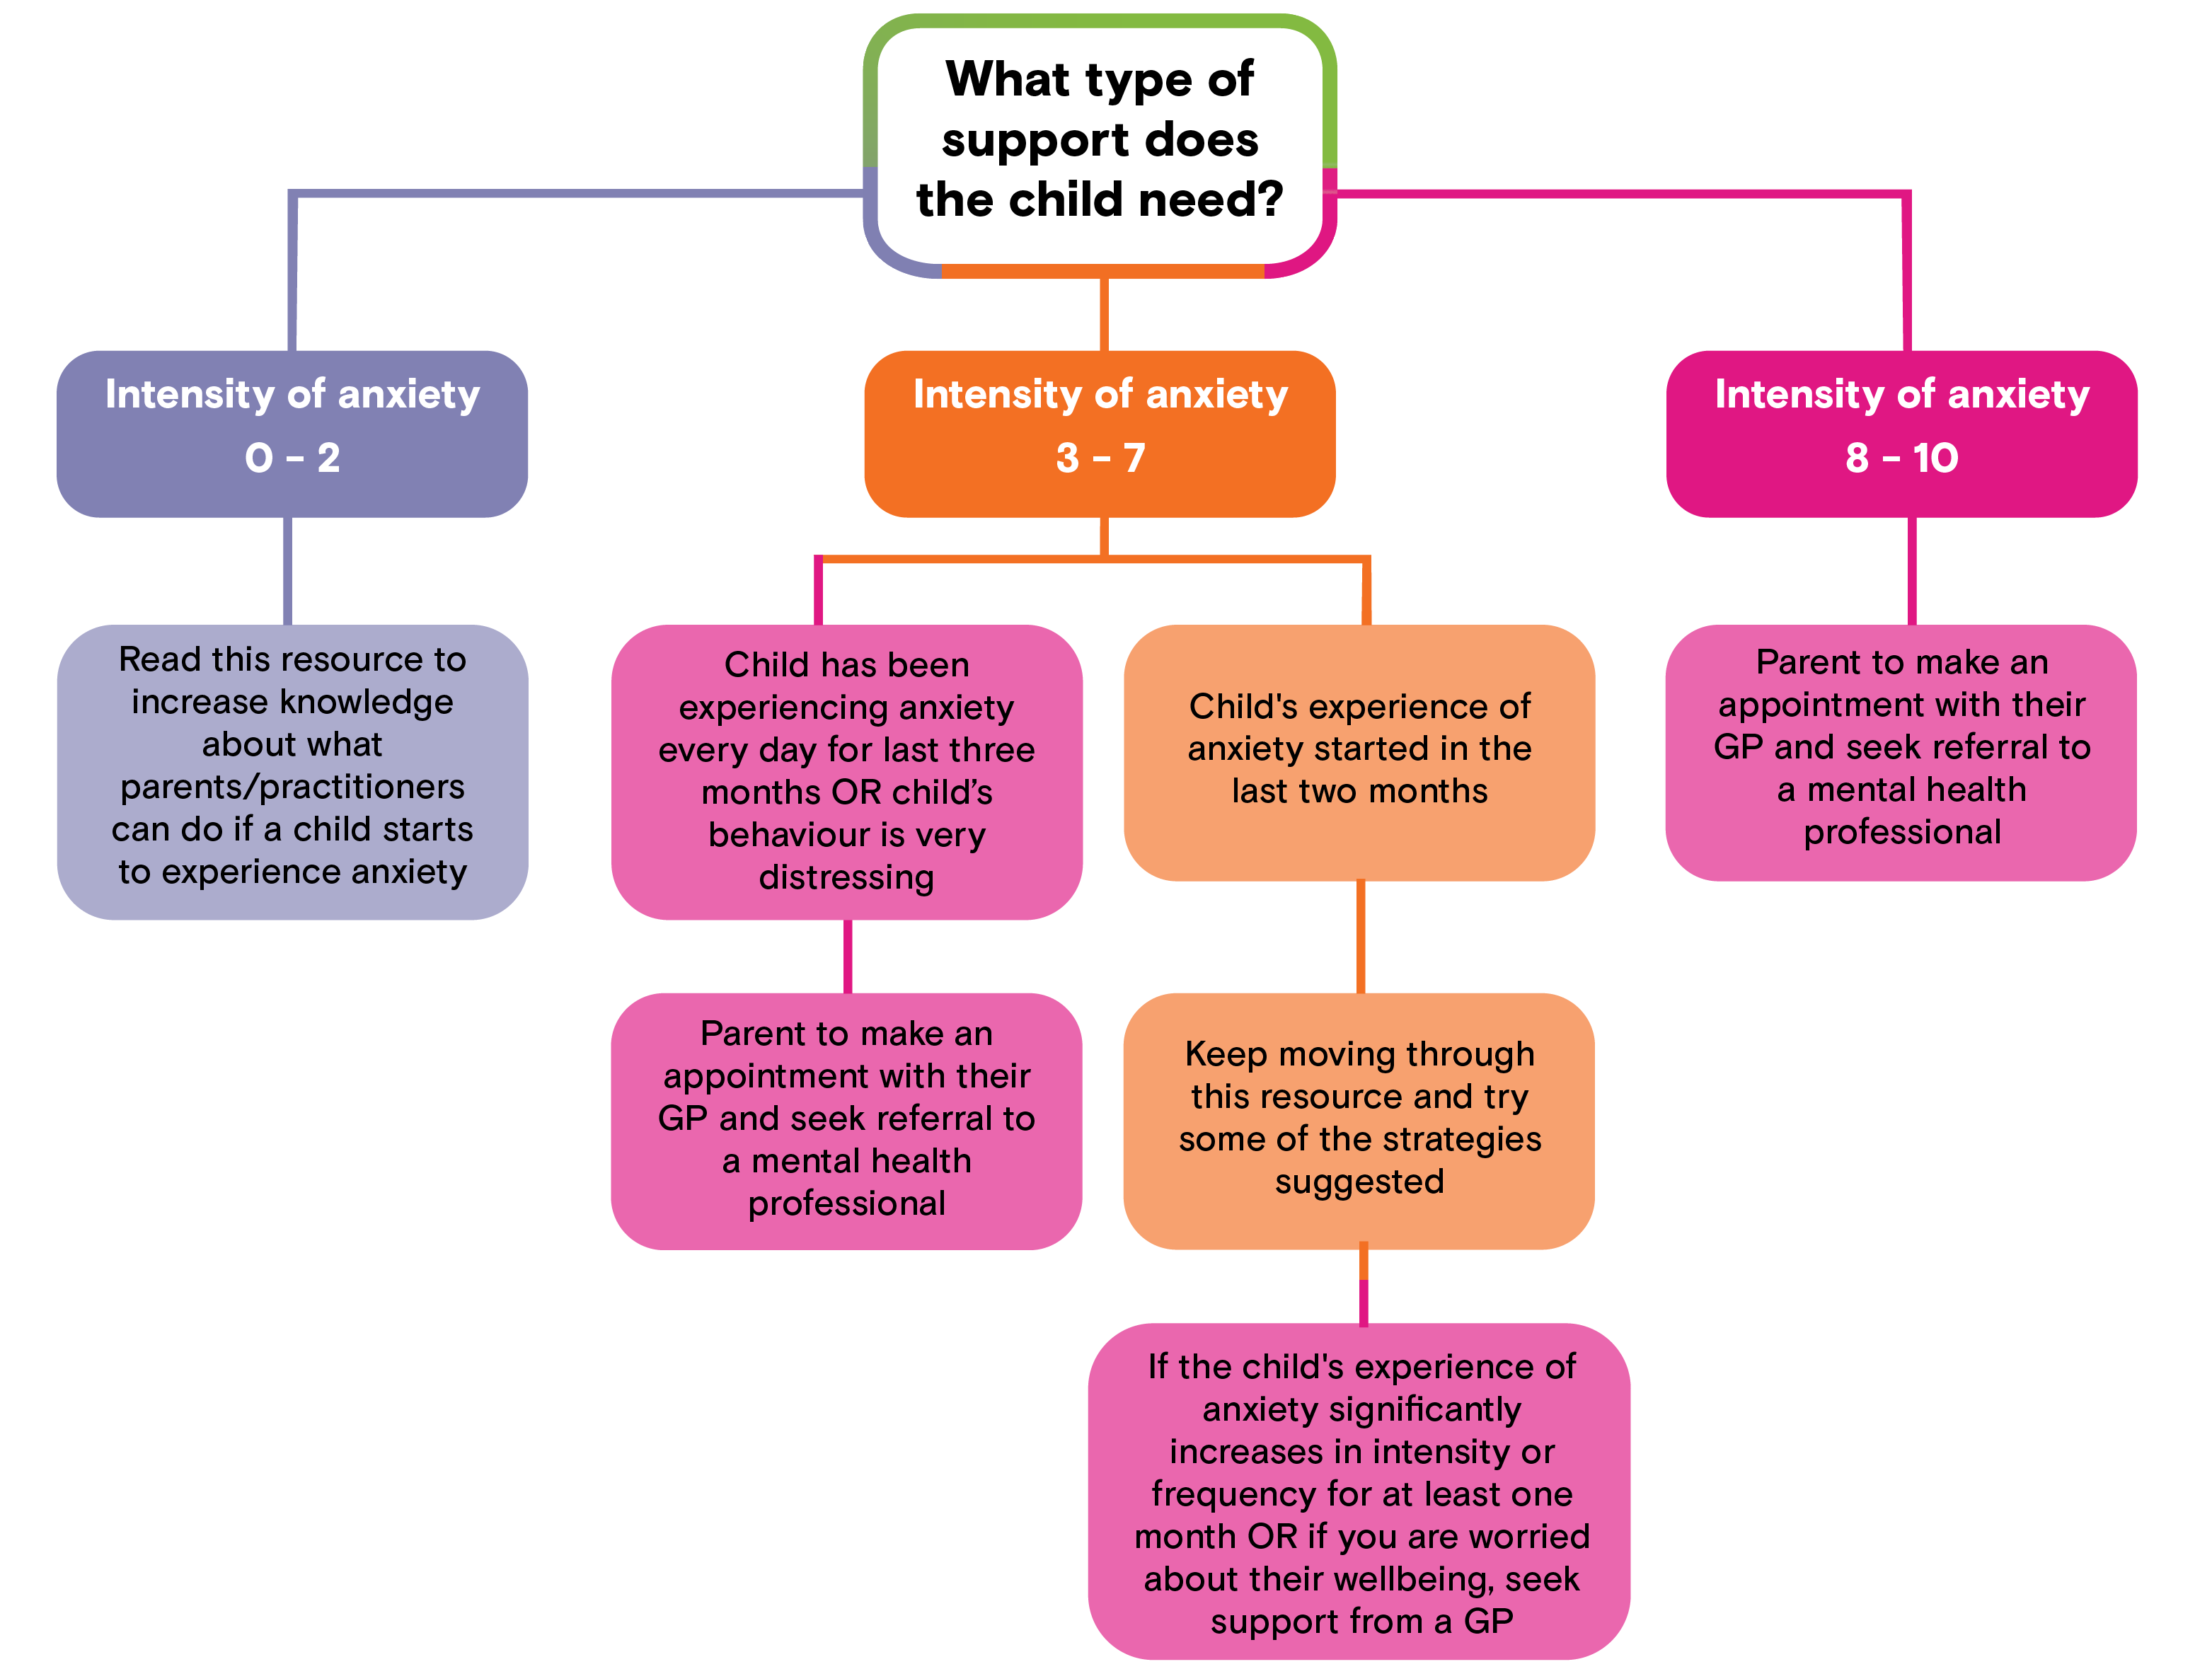 Decision tree graphic. At the top, a white box says, what type of support does the child need? Branching off to the left, a purple box says, intensity of anxiety 0-2. Below that, another purple box says, Read this resource to increase knowledge about what parents/practitioners can do if a child starts to experience anxiety. In the middle of the tree, an orange box says, Intensity of anxiety 3-7. Branching off from the left, a pink box says, Child has been experiencing anxiety every day for last three months OR child's behaviour is very distressing. Below that, another pink box says, Parent to make an appointment with their GP and seek referral to a mental health professional. Branching down on the right from the Intensity of anxiety 3-7 box, an orange box says Child's experience of anxiety started in the last two months. Below that, another orange box sayd Keep moving through this resource and try some of the strategies suggested. Below that, a pink box says, If the child's experience of anxiety significantly increases in intensity or frequency for at least one month OR if you are worried about their wellbeing, seek support from a GP. On the far right of the tree, a pink box says, Intensity of anxiety 8-10. Below that another pink box says, Parent to make an appointment with their GP and seek referral to a mental health professional.